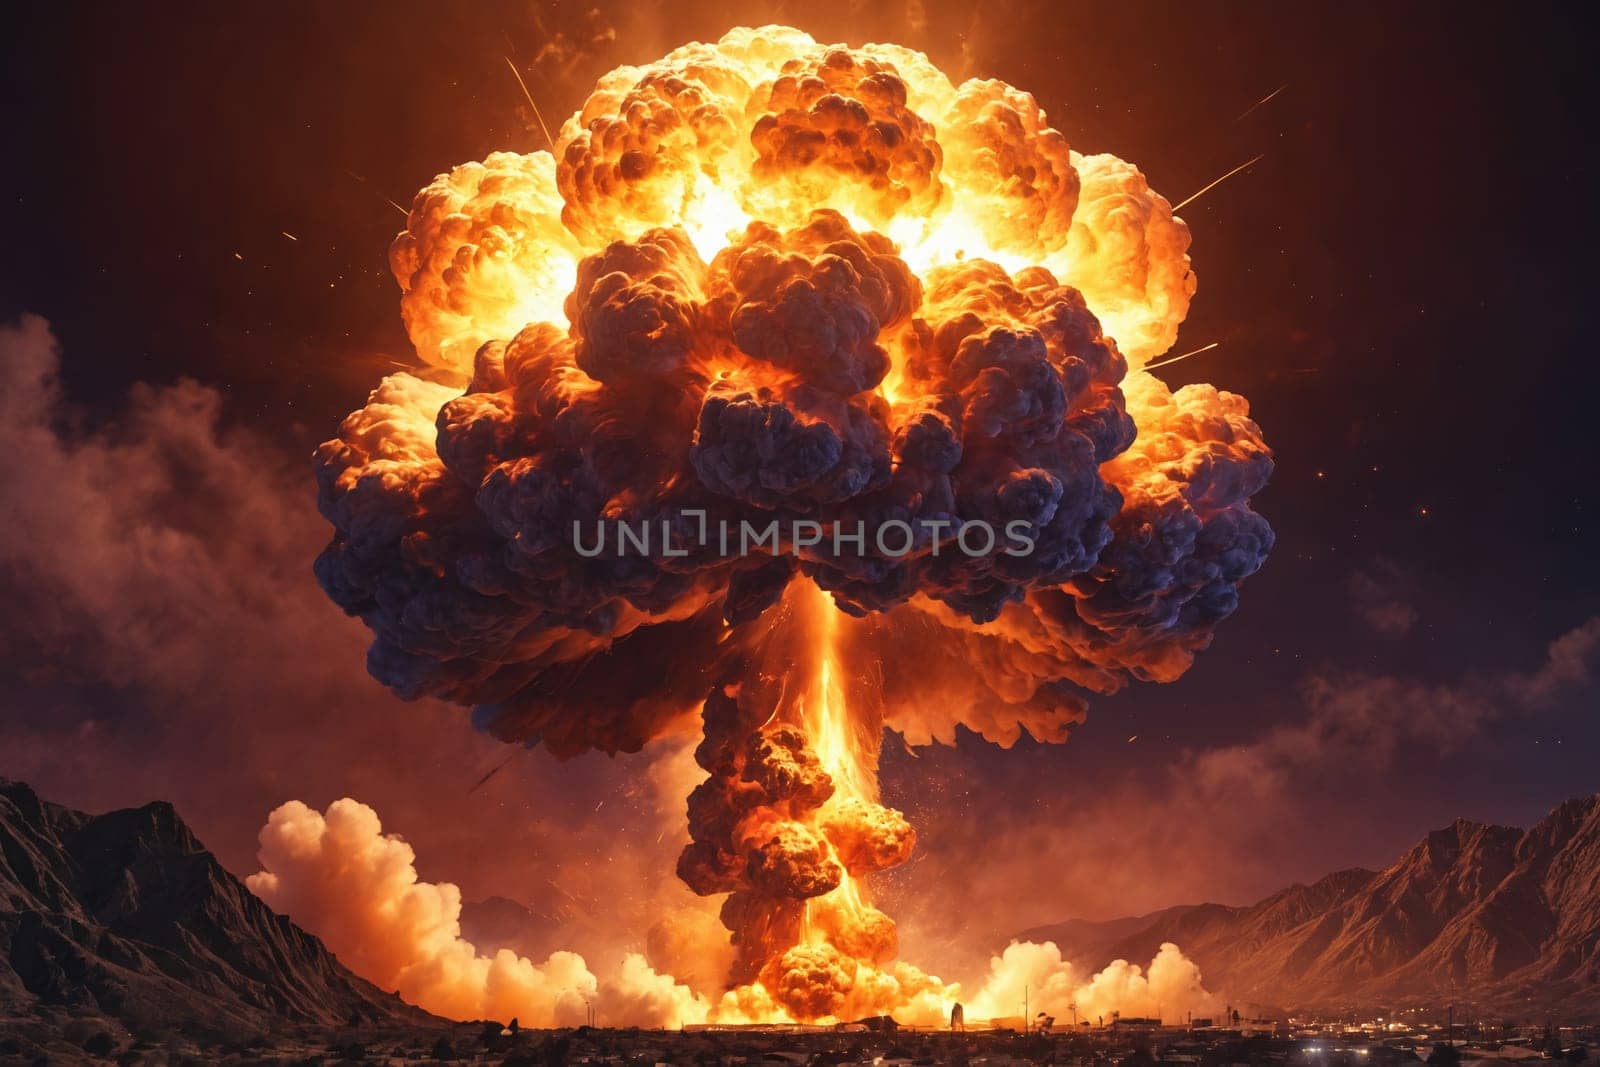 An apocalyptic vision as a towering mushroom cloud overtakes the city's horizon, signaling a moment of unparalleled destruction.